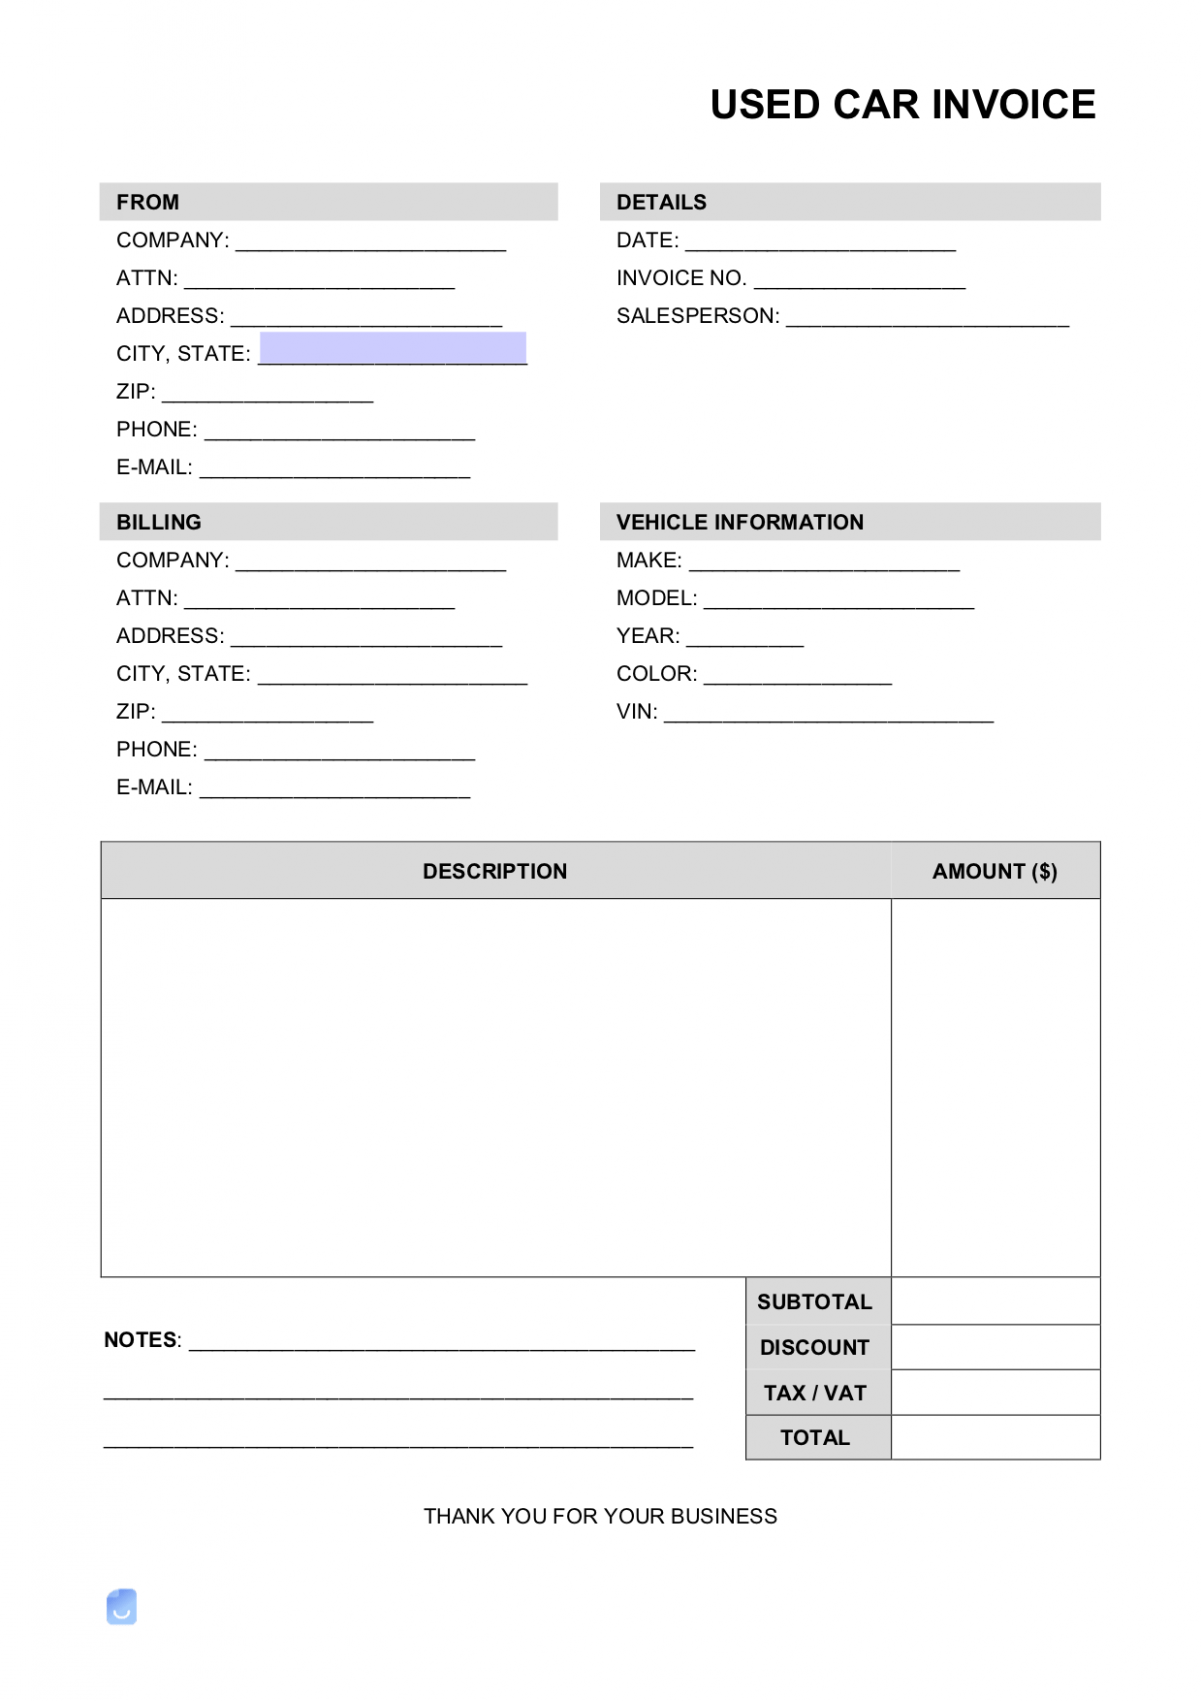 Sample Used Car Invoice Template Word